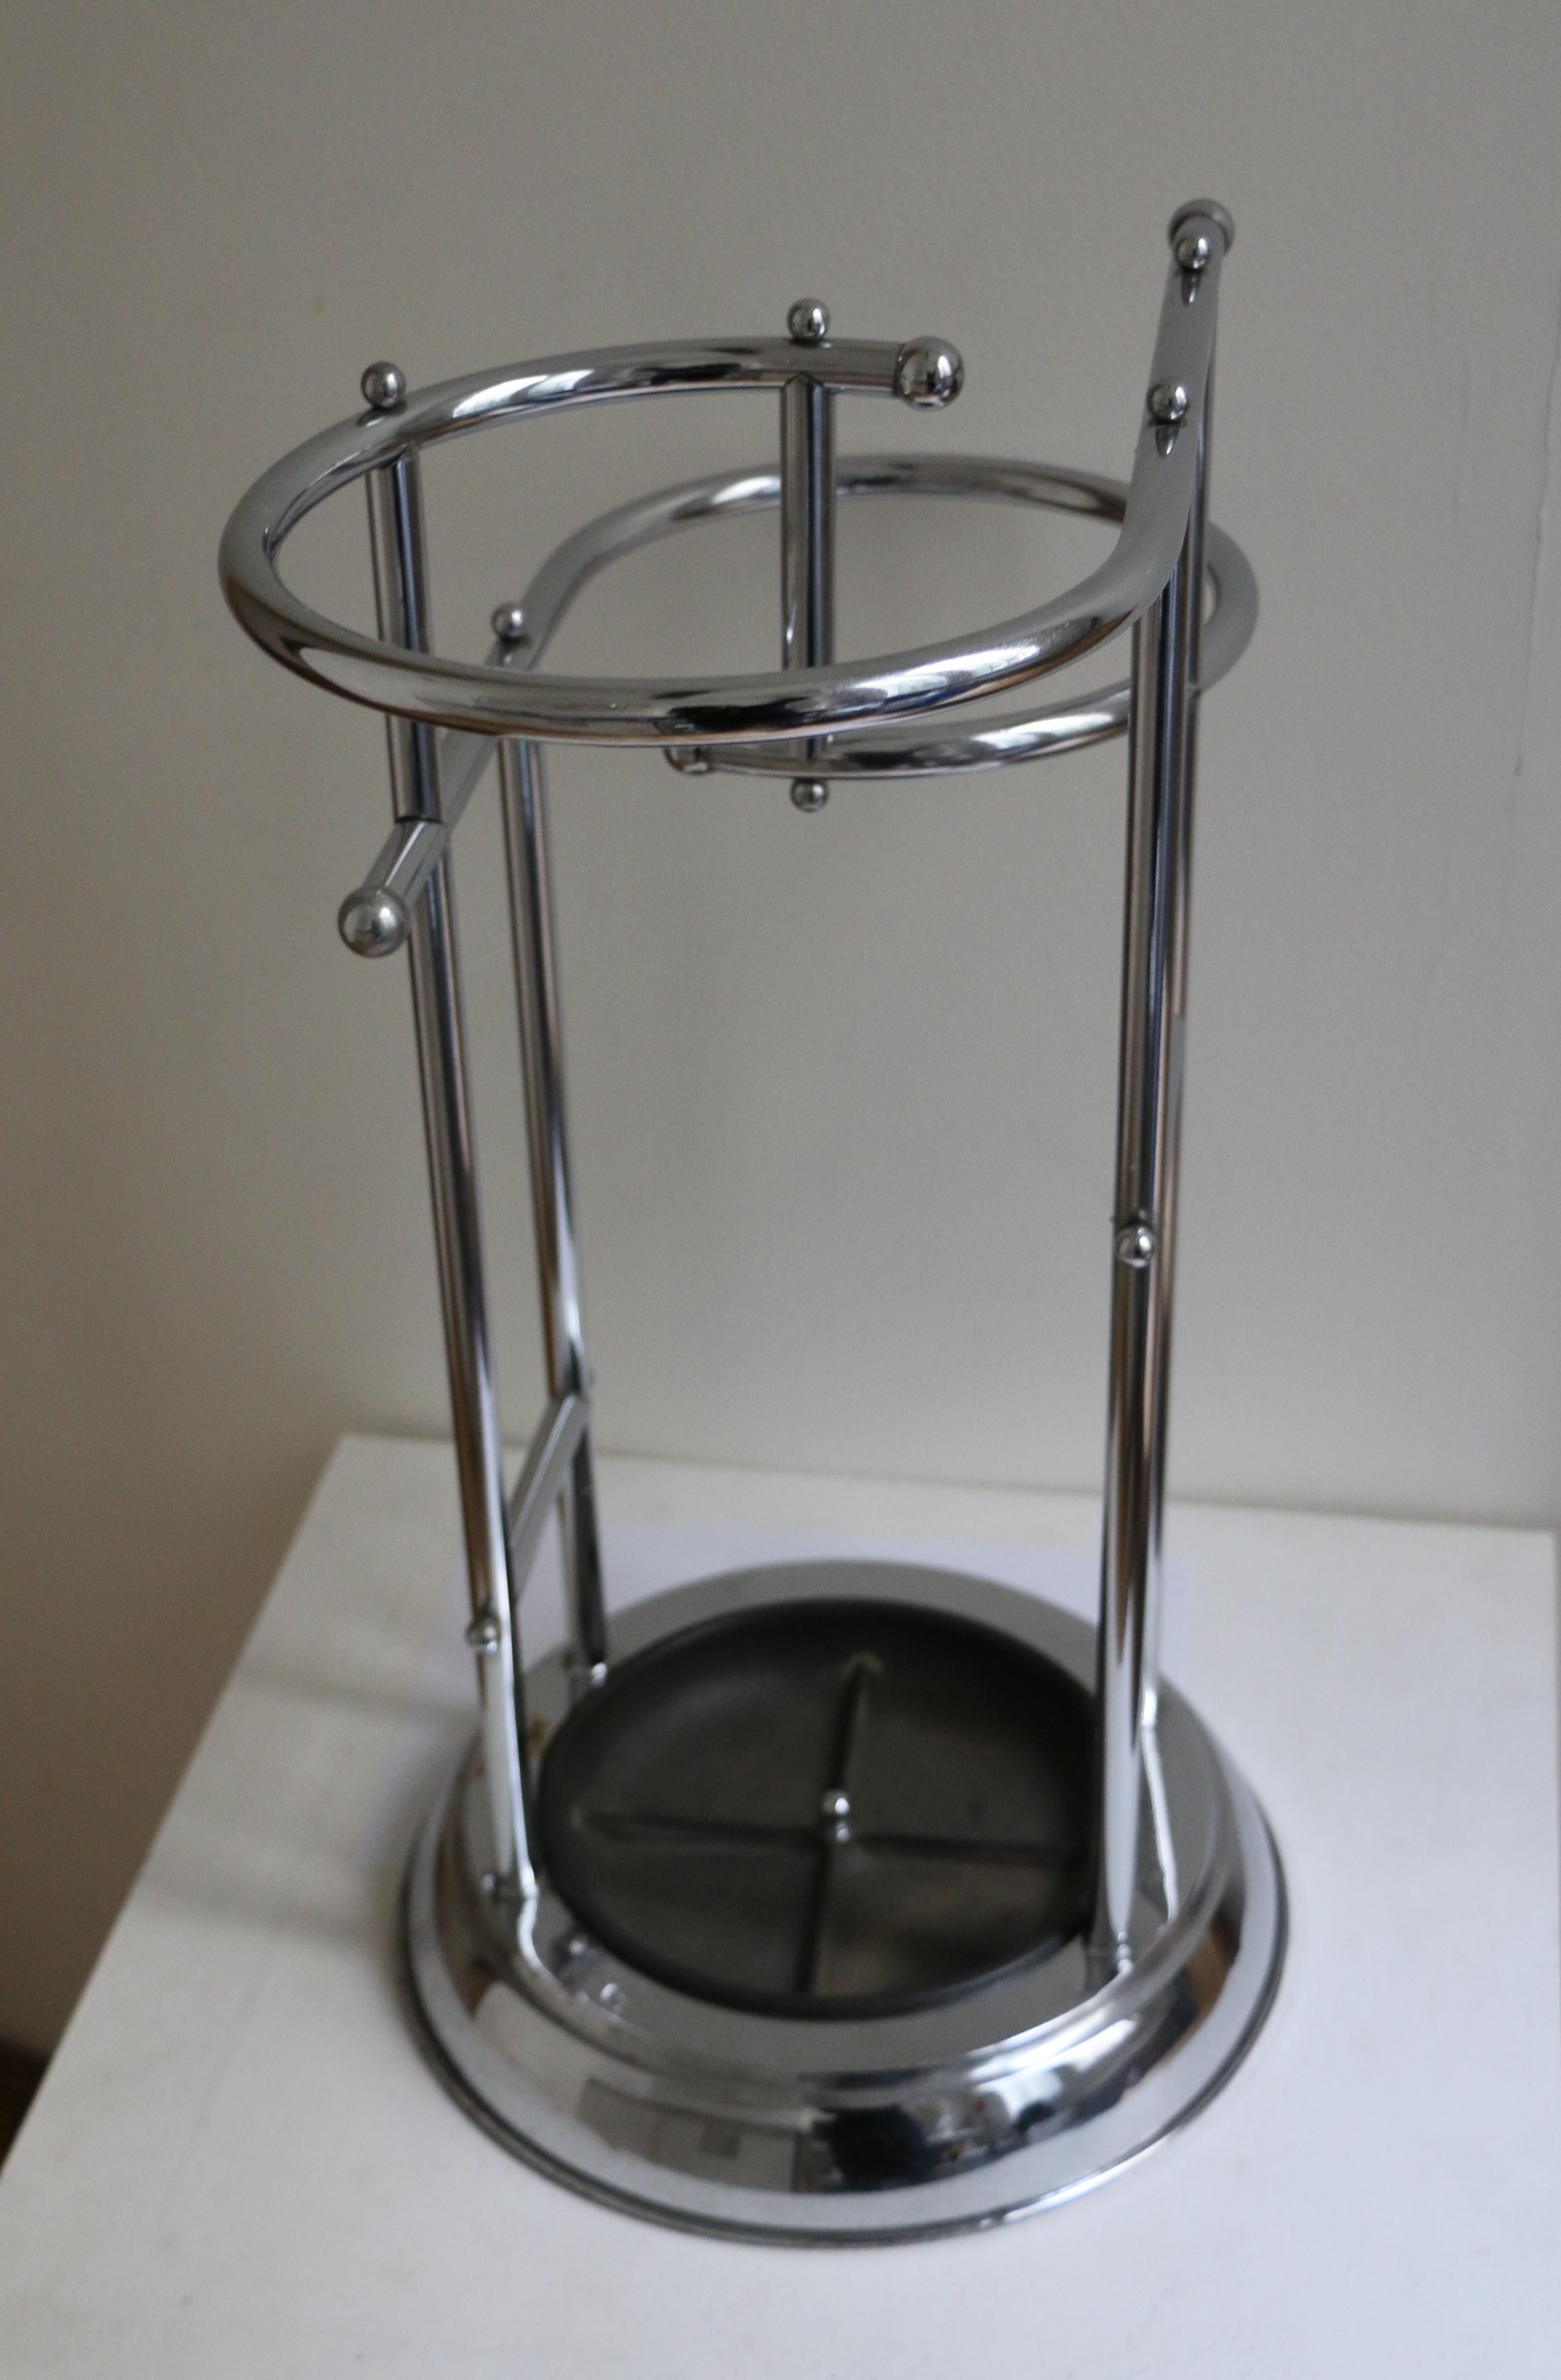 This rare umbrella stand was in the entrance hall of a 1940s house, since the building of the house. It is made of chromium-plated metal and black bakelite. Made in Benelux (most probably Belgium).